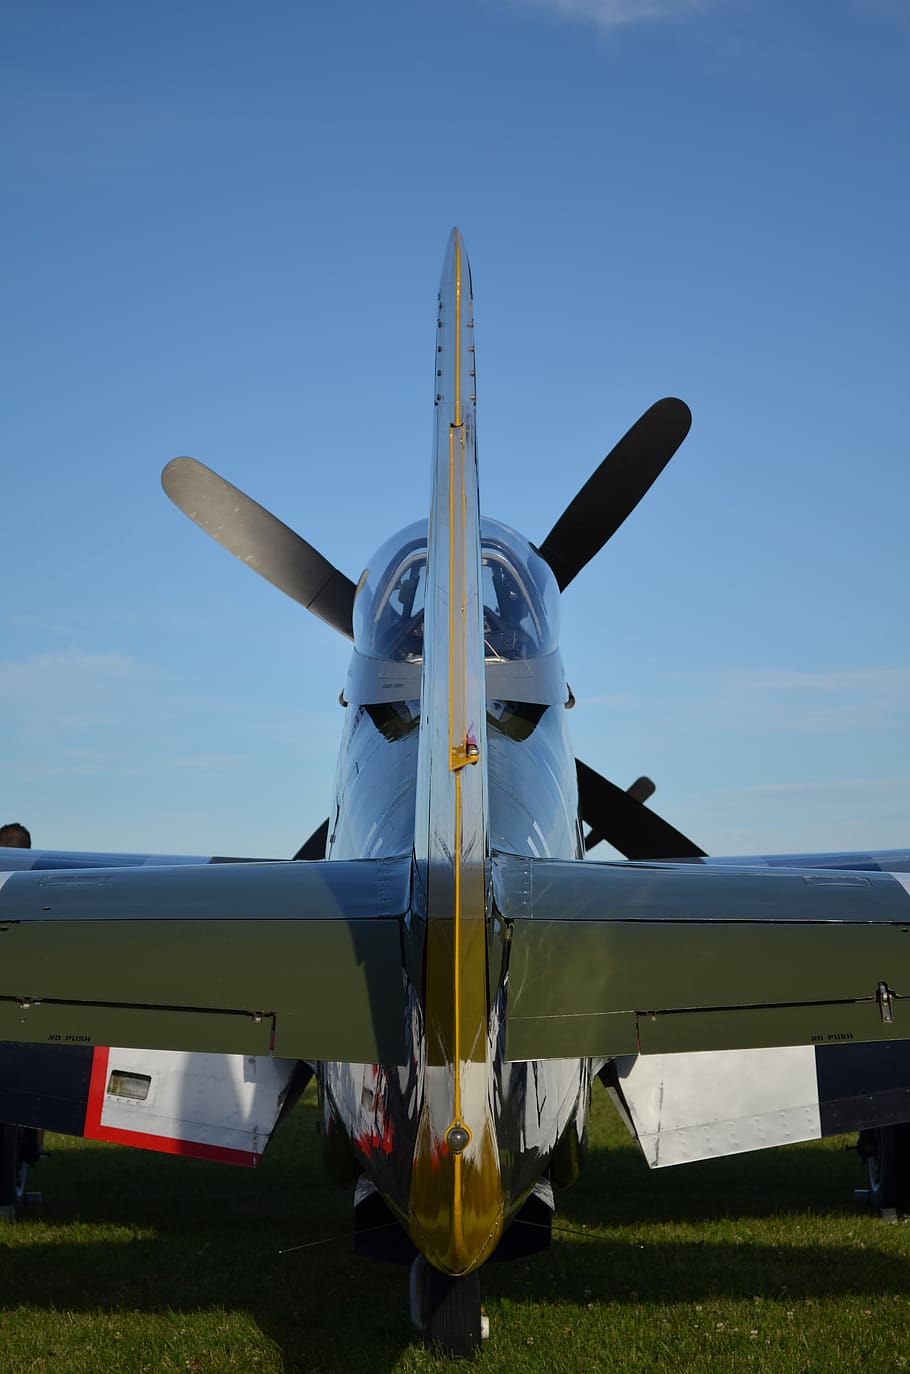 mustang, p51, fighter, aircraft, military, plane, aviation, airplane, propeller, flight